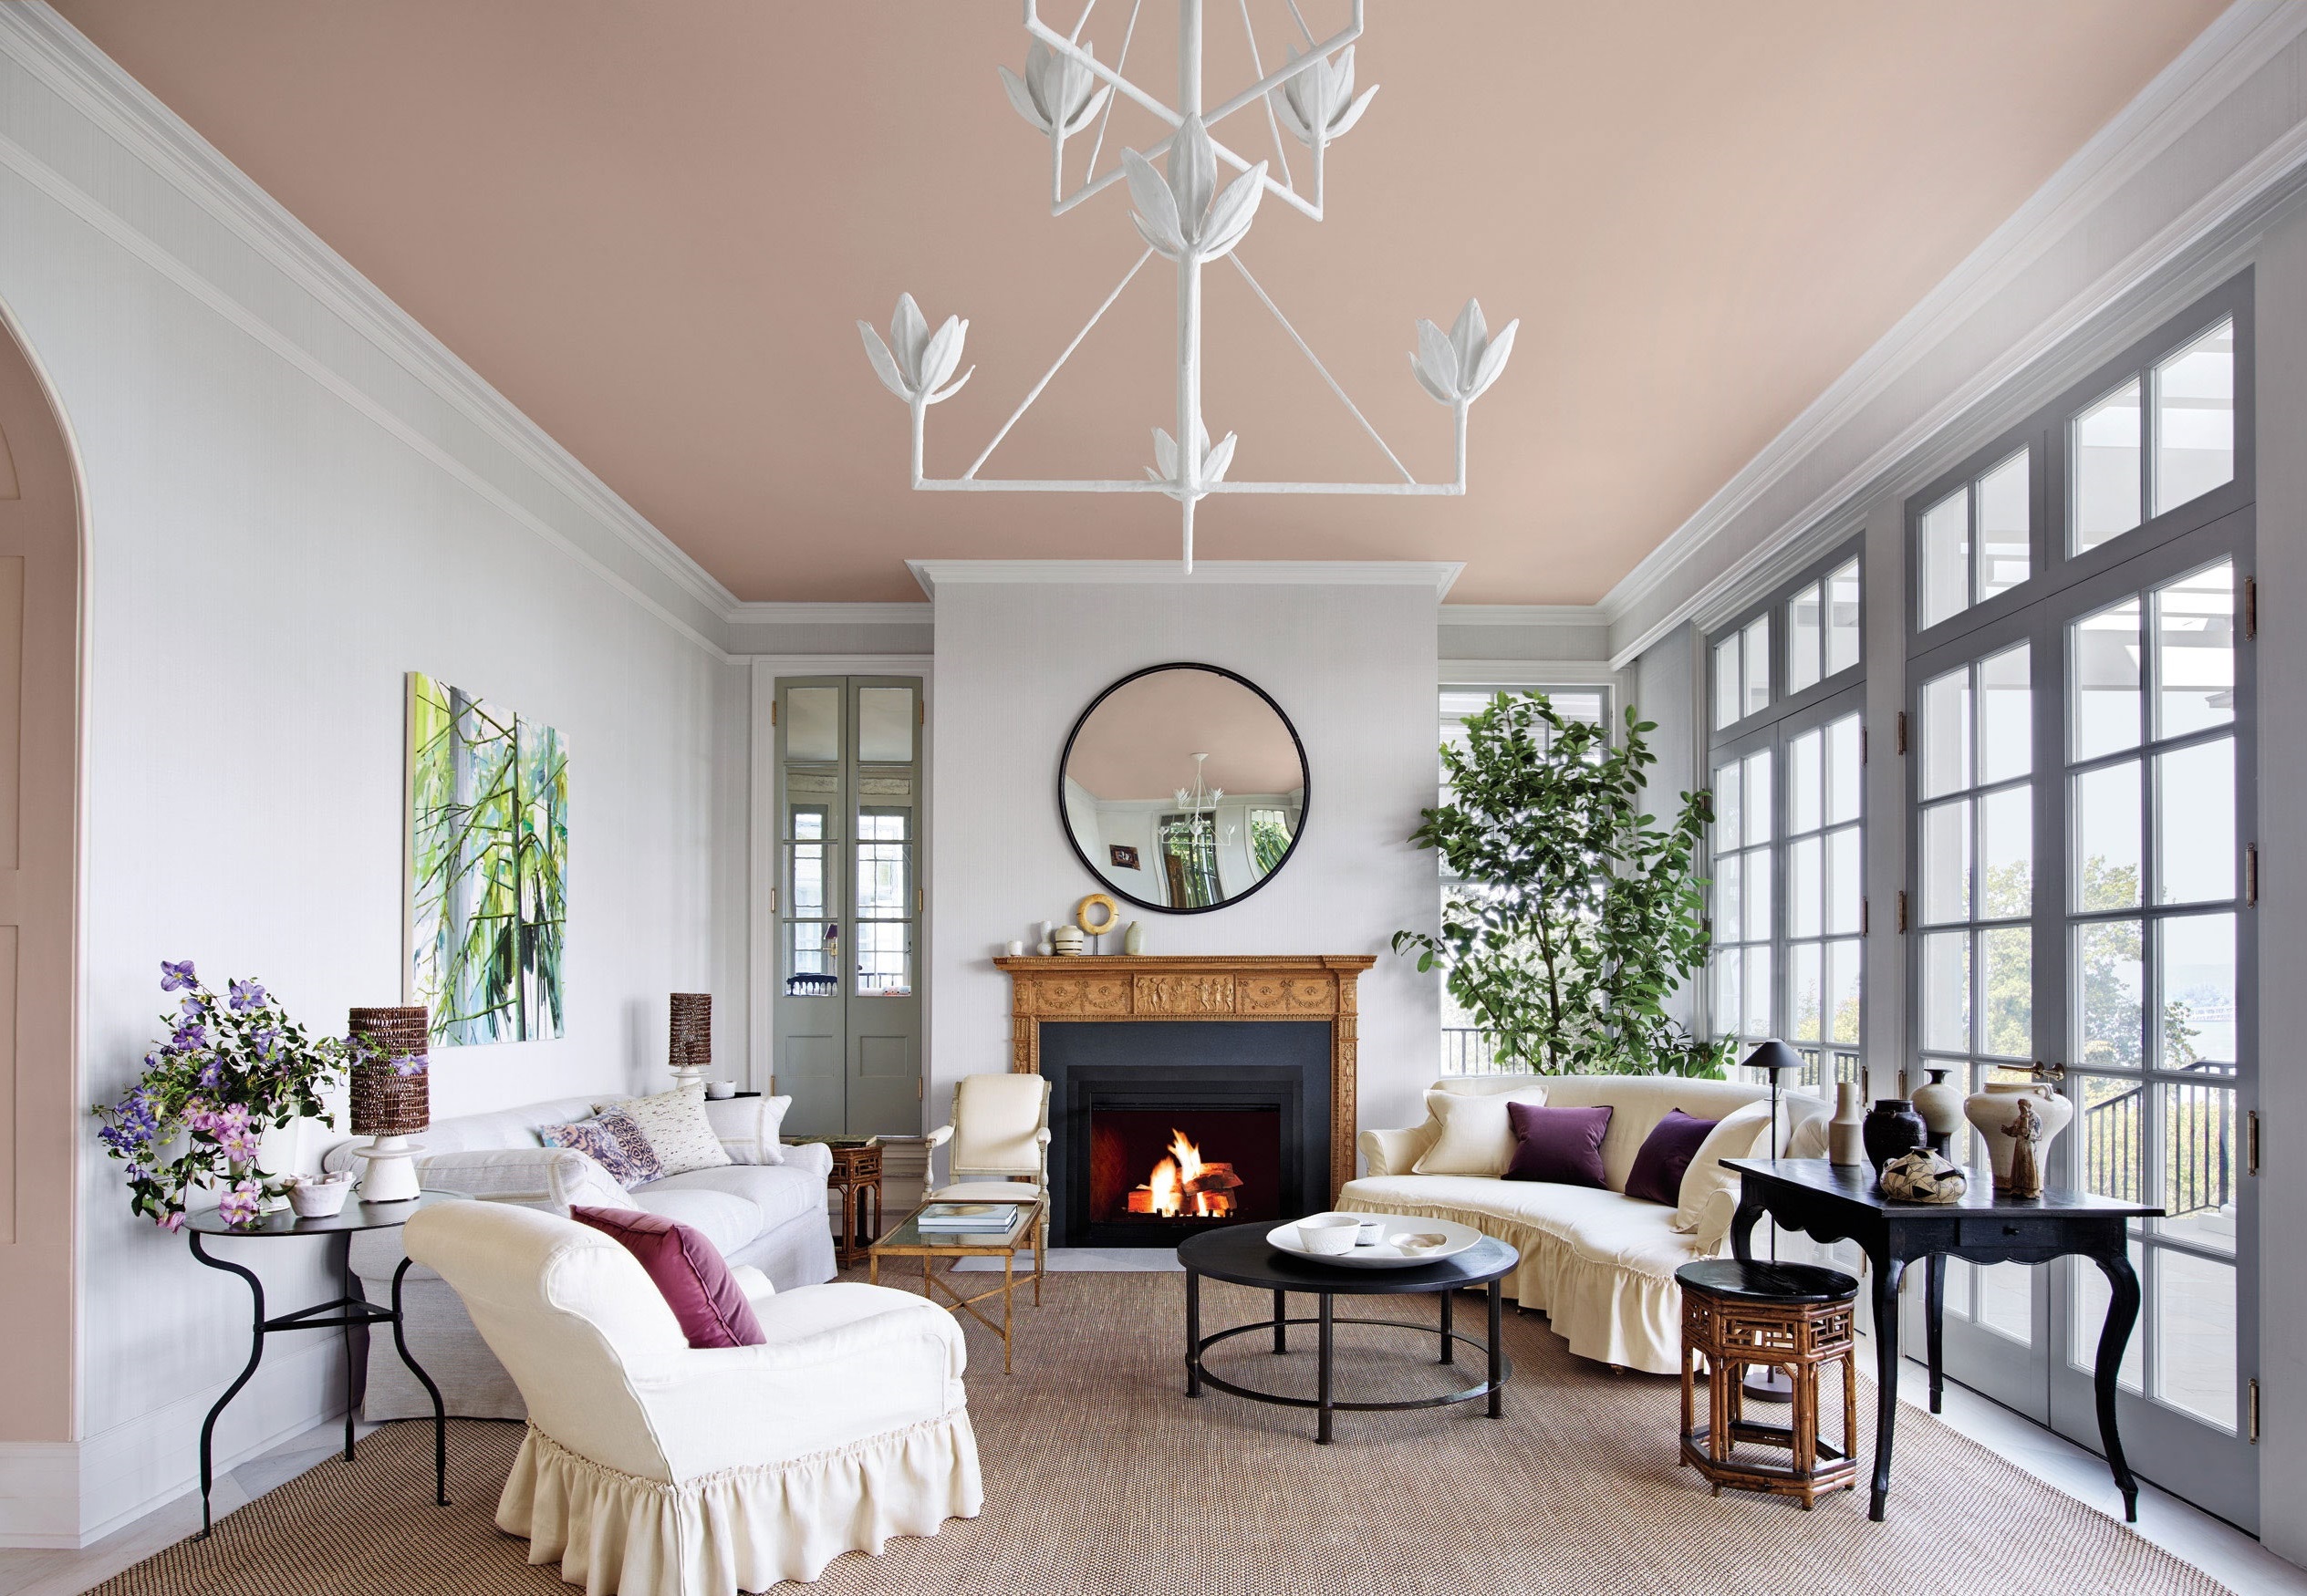 painted-ceiling +70 Unique Ceiling Design Ideas for Your Living Room